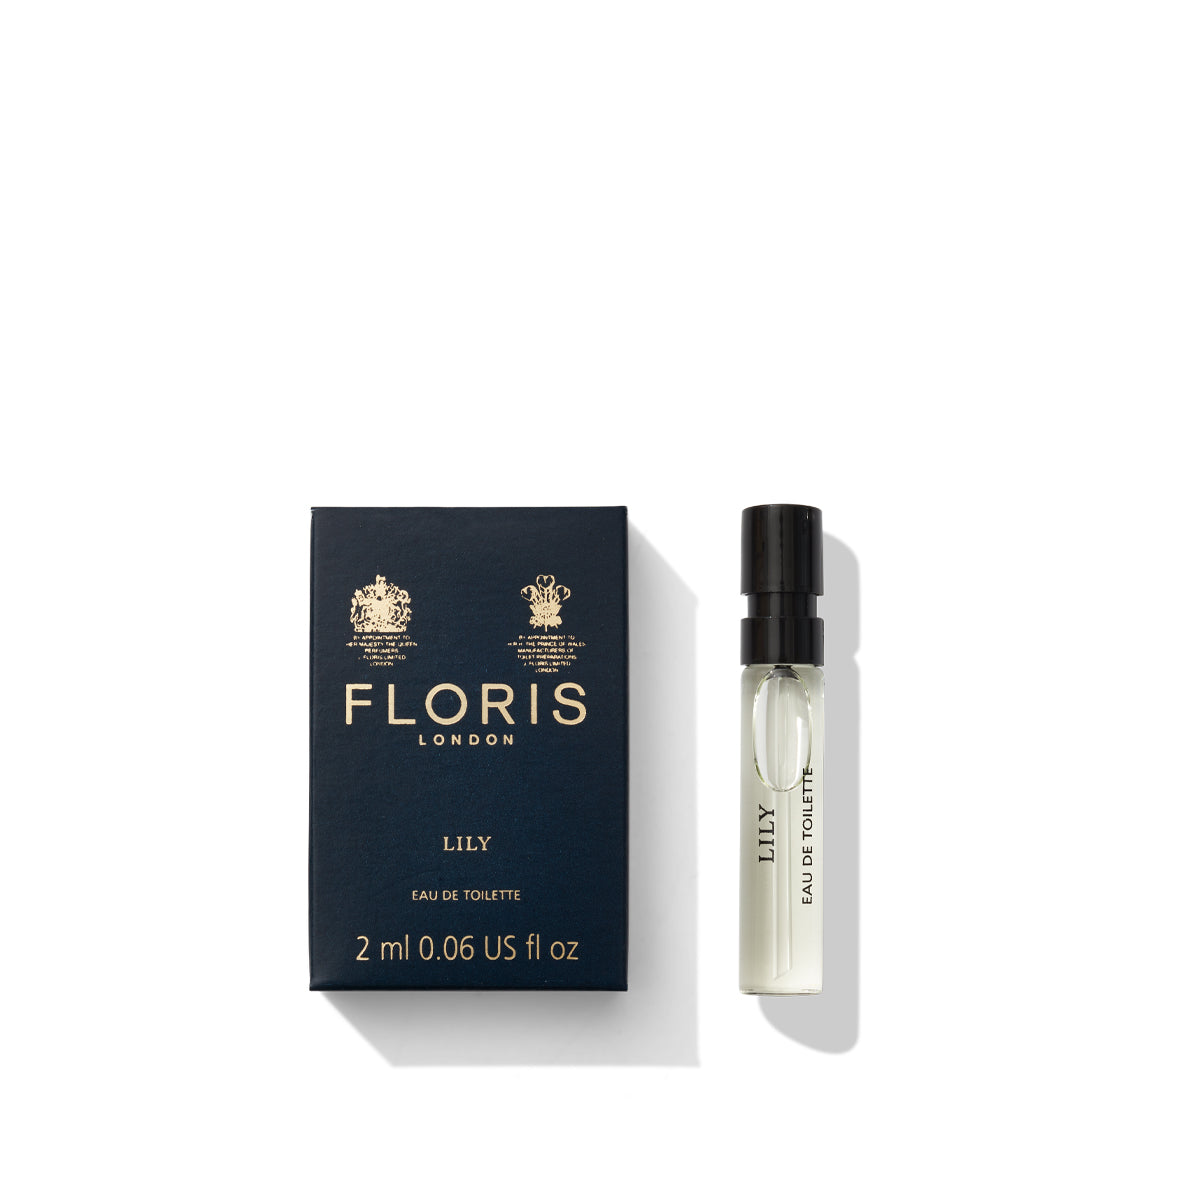 2ml sample of lily from floris london 